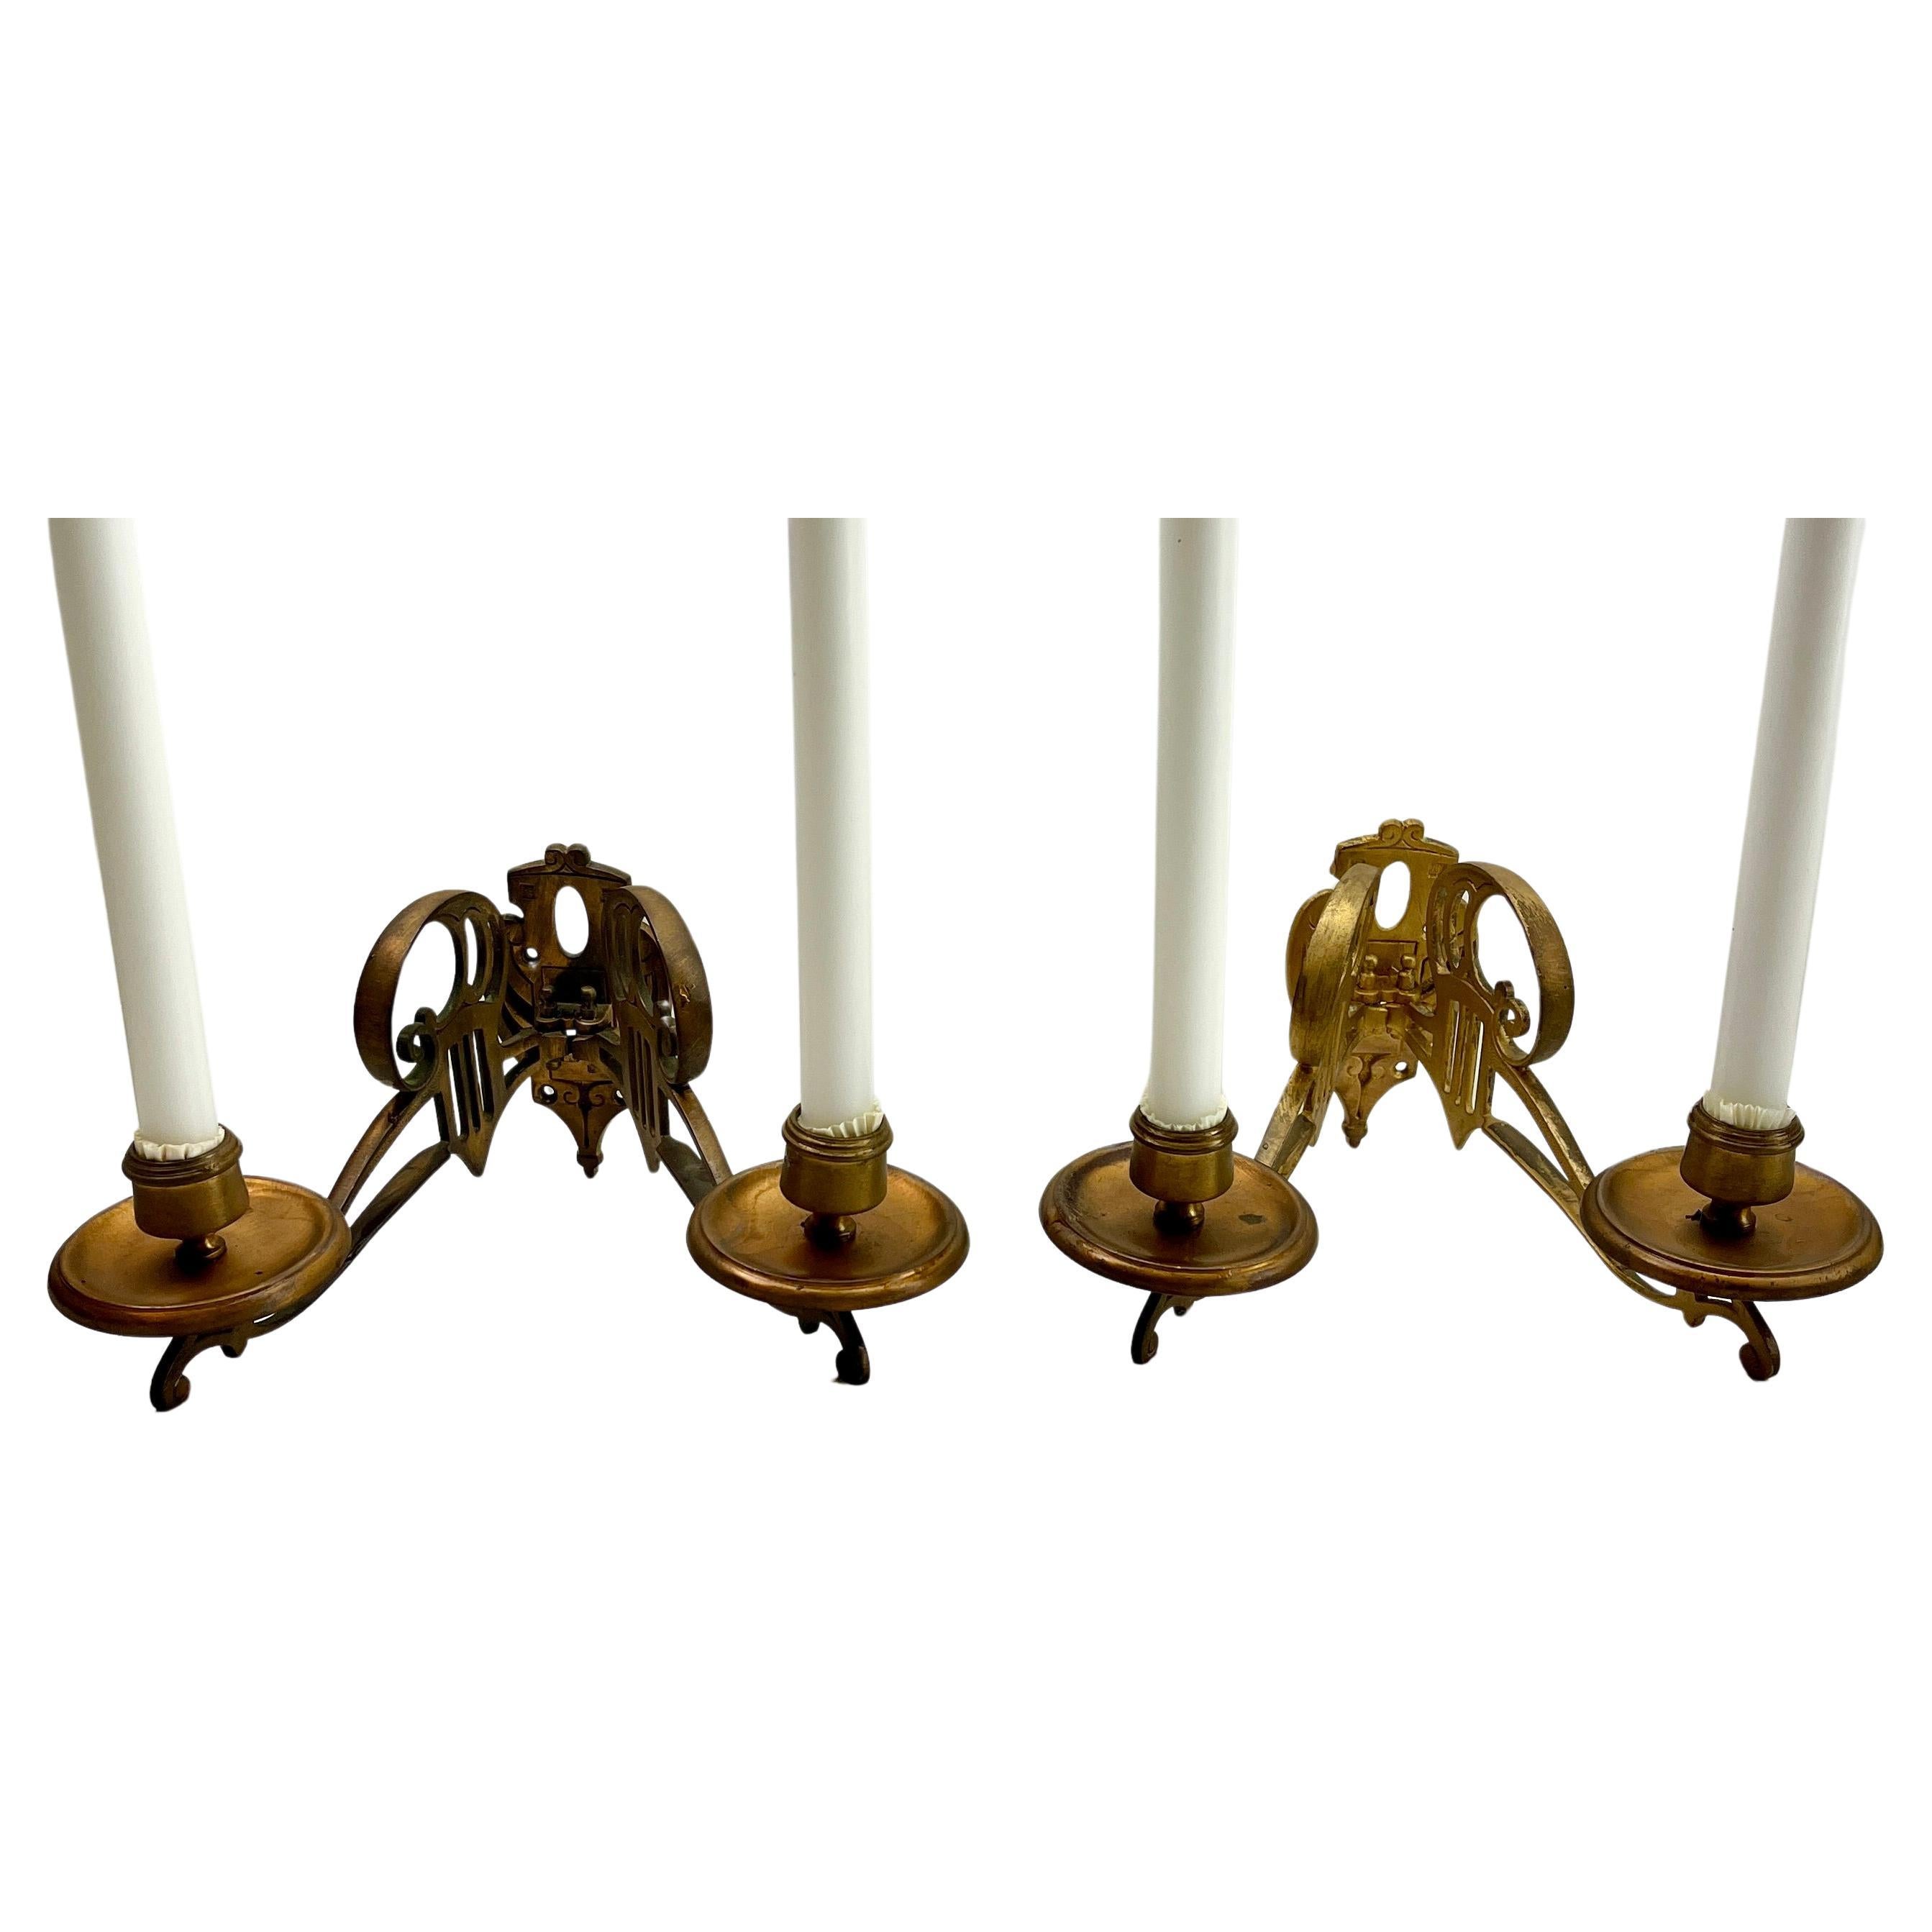 Art Nouveau  brass pair of  Wall Mount candlesticks 1930s
Originel Patina
Excellent condition.
looks simply stunning.

  

